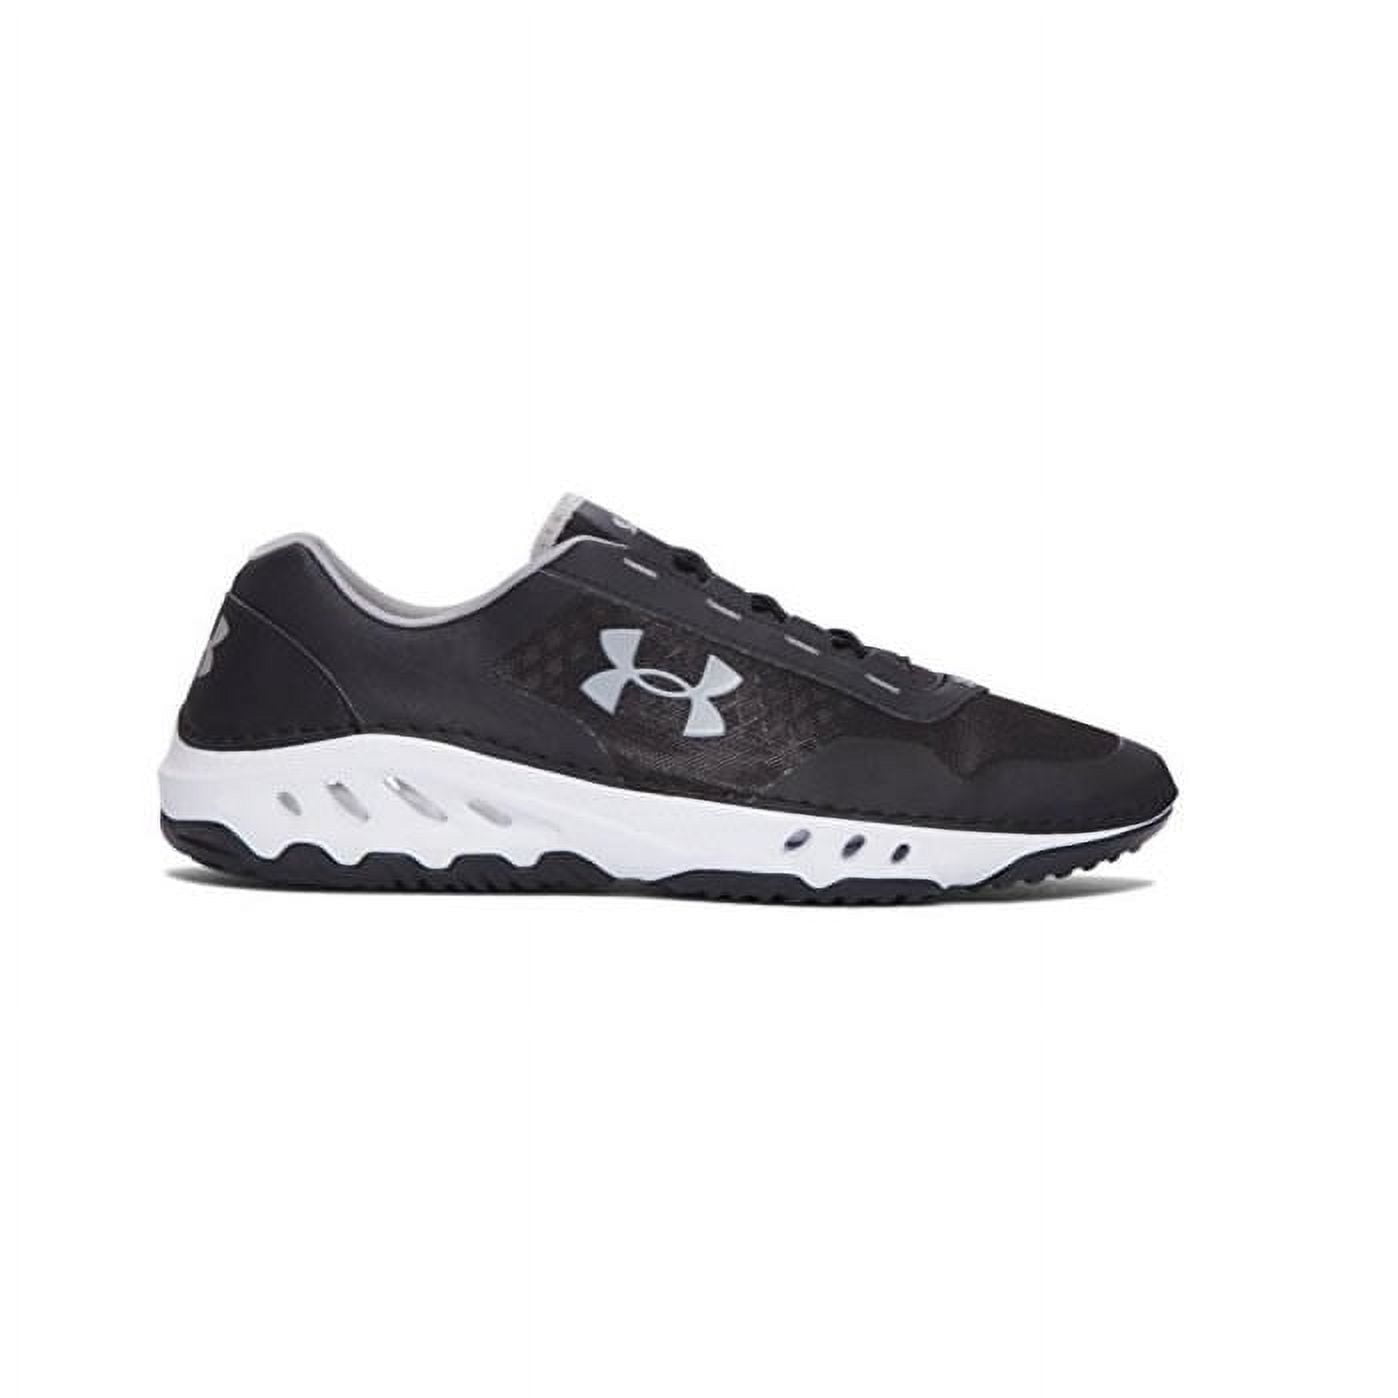 Under Armour Drainster 1268868-001 Men's Fishing Shoes - Size 10 -  Black/White 